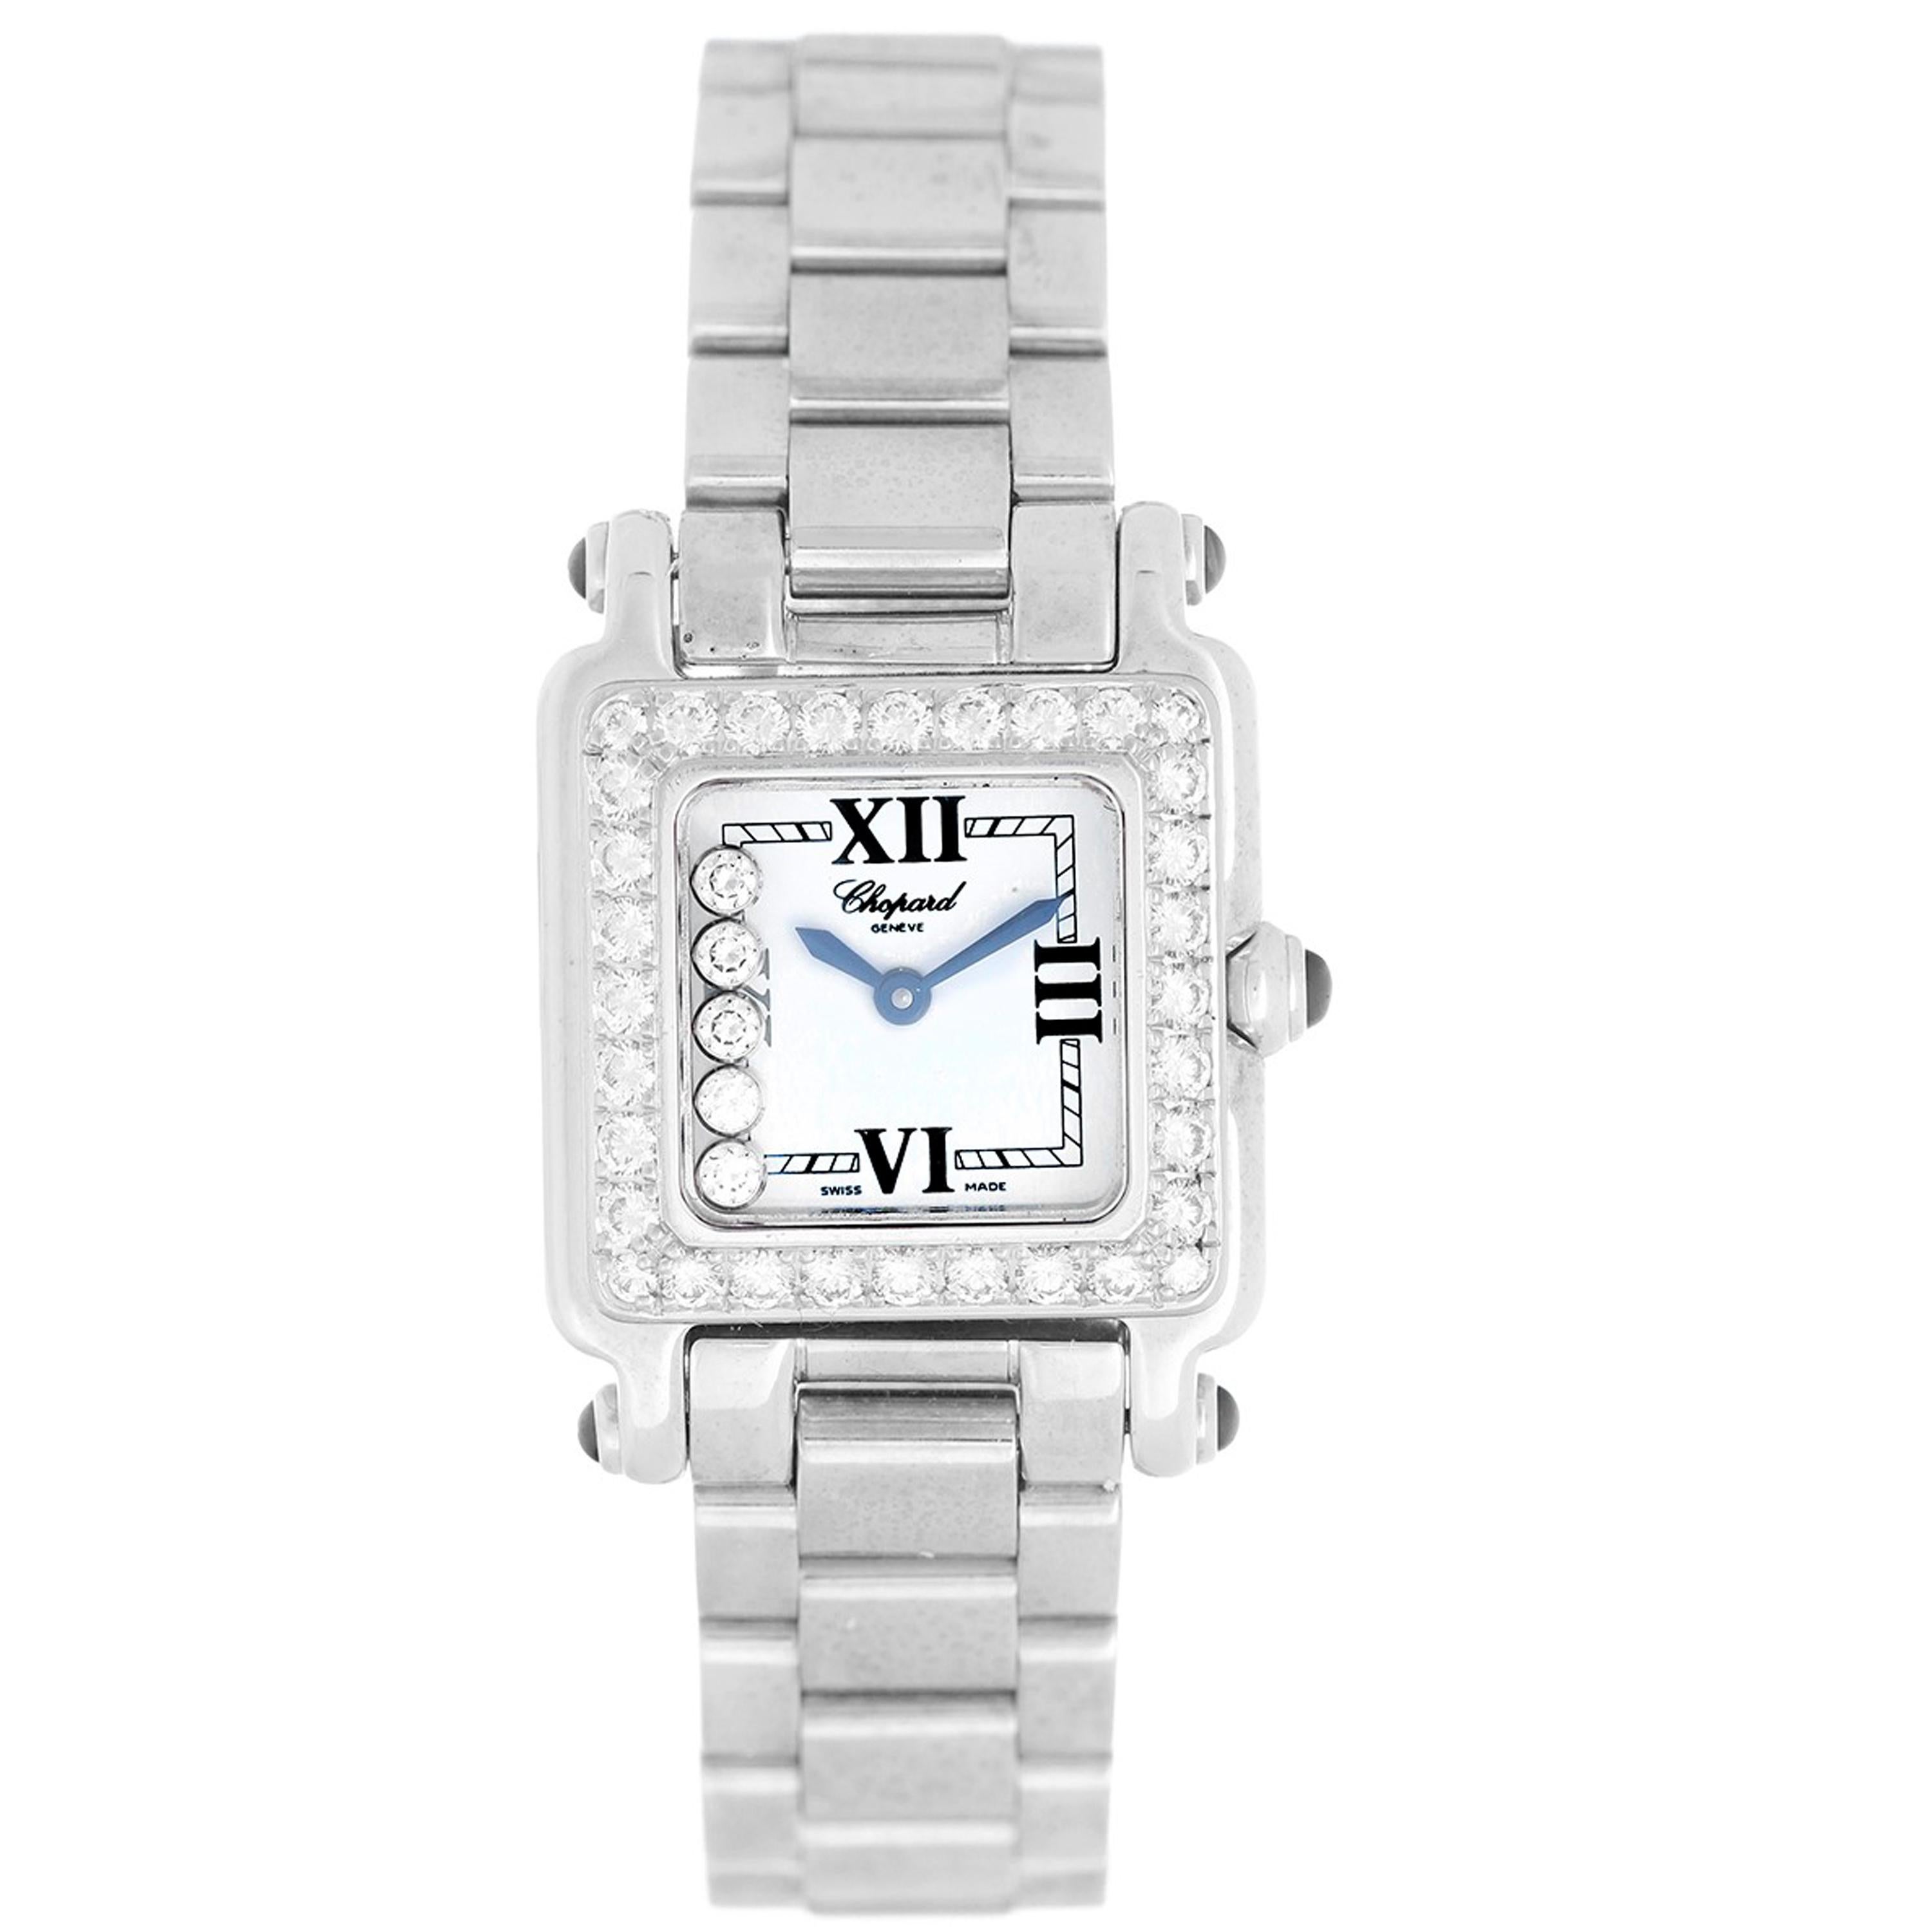 Quartz. 18k white gold case (28mm x 31mm). White dial with black Roman numerals and 5 floating diamonds. 18k white gold bracelet. Will fit approx 6 1/2 in wrist.  Pre-owned with Chopard box and papers.

Ref 27/6851-23/11